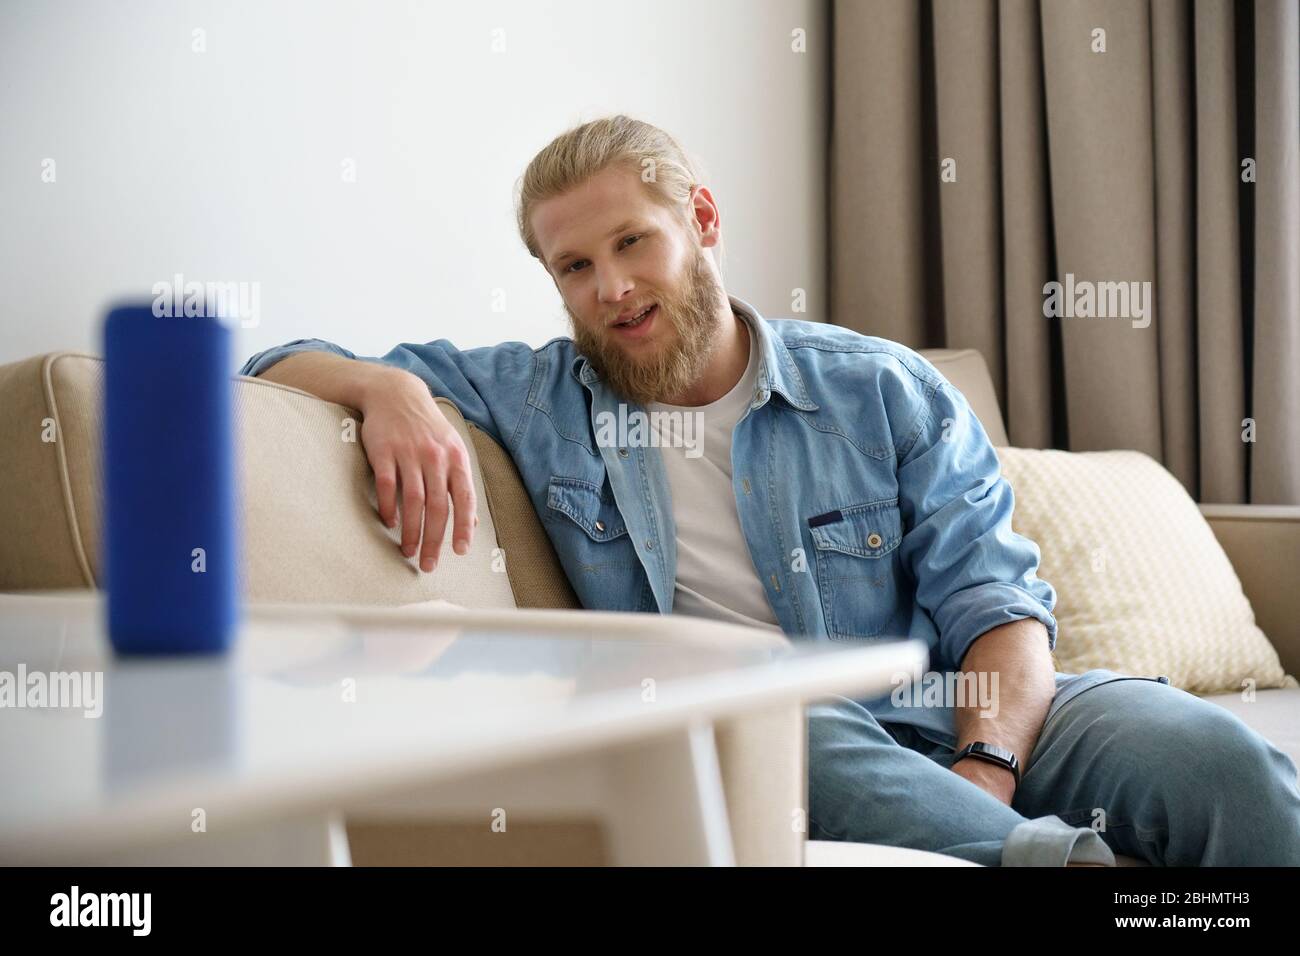 Young man speaking activating portable wireless speaker on table at smart home. Stock Photo